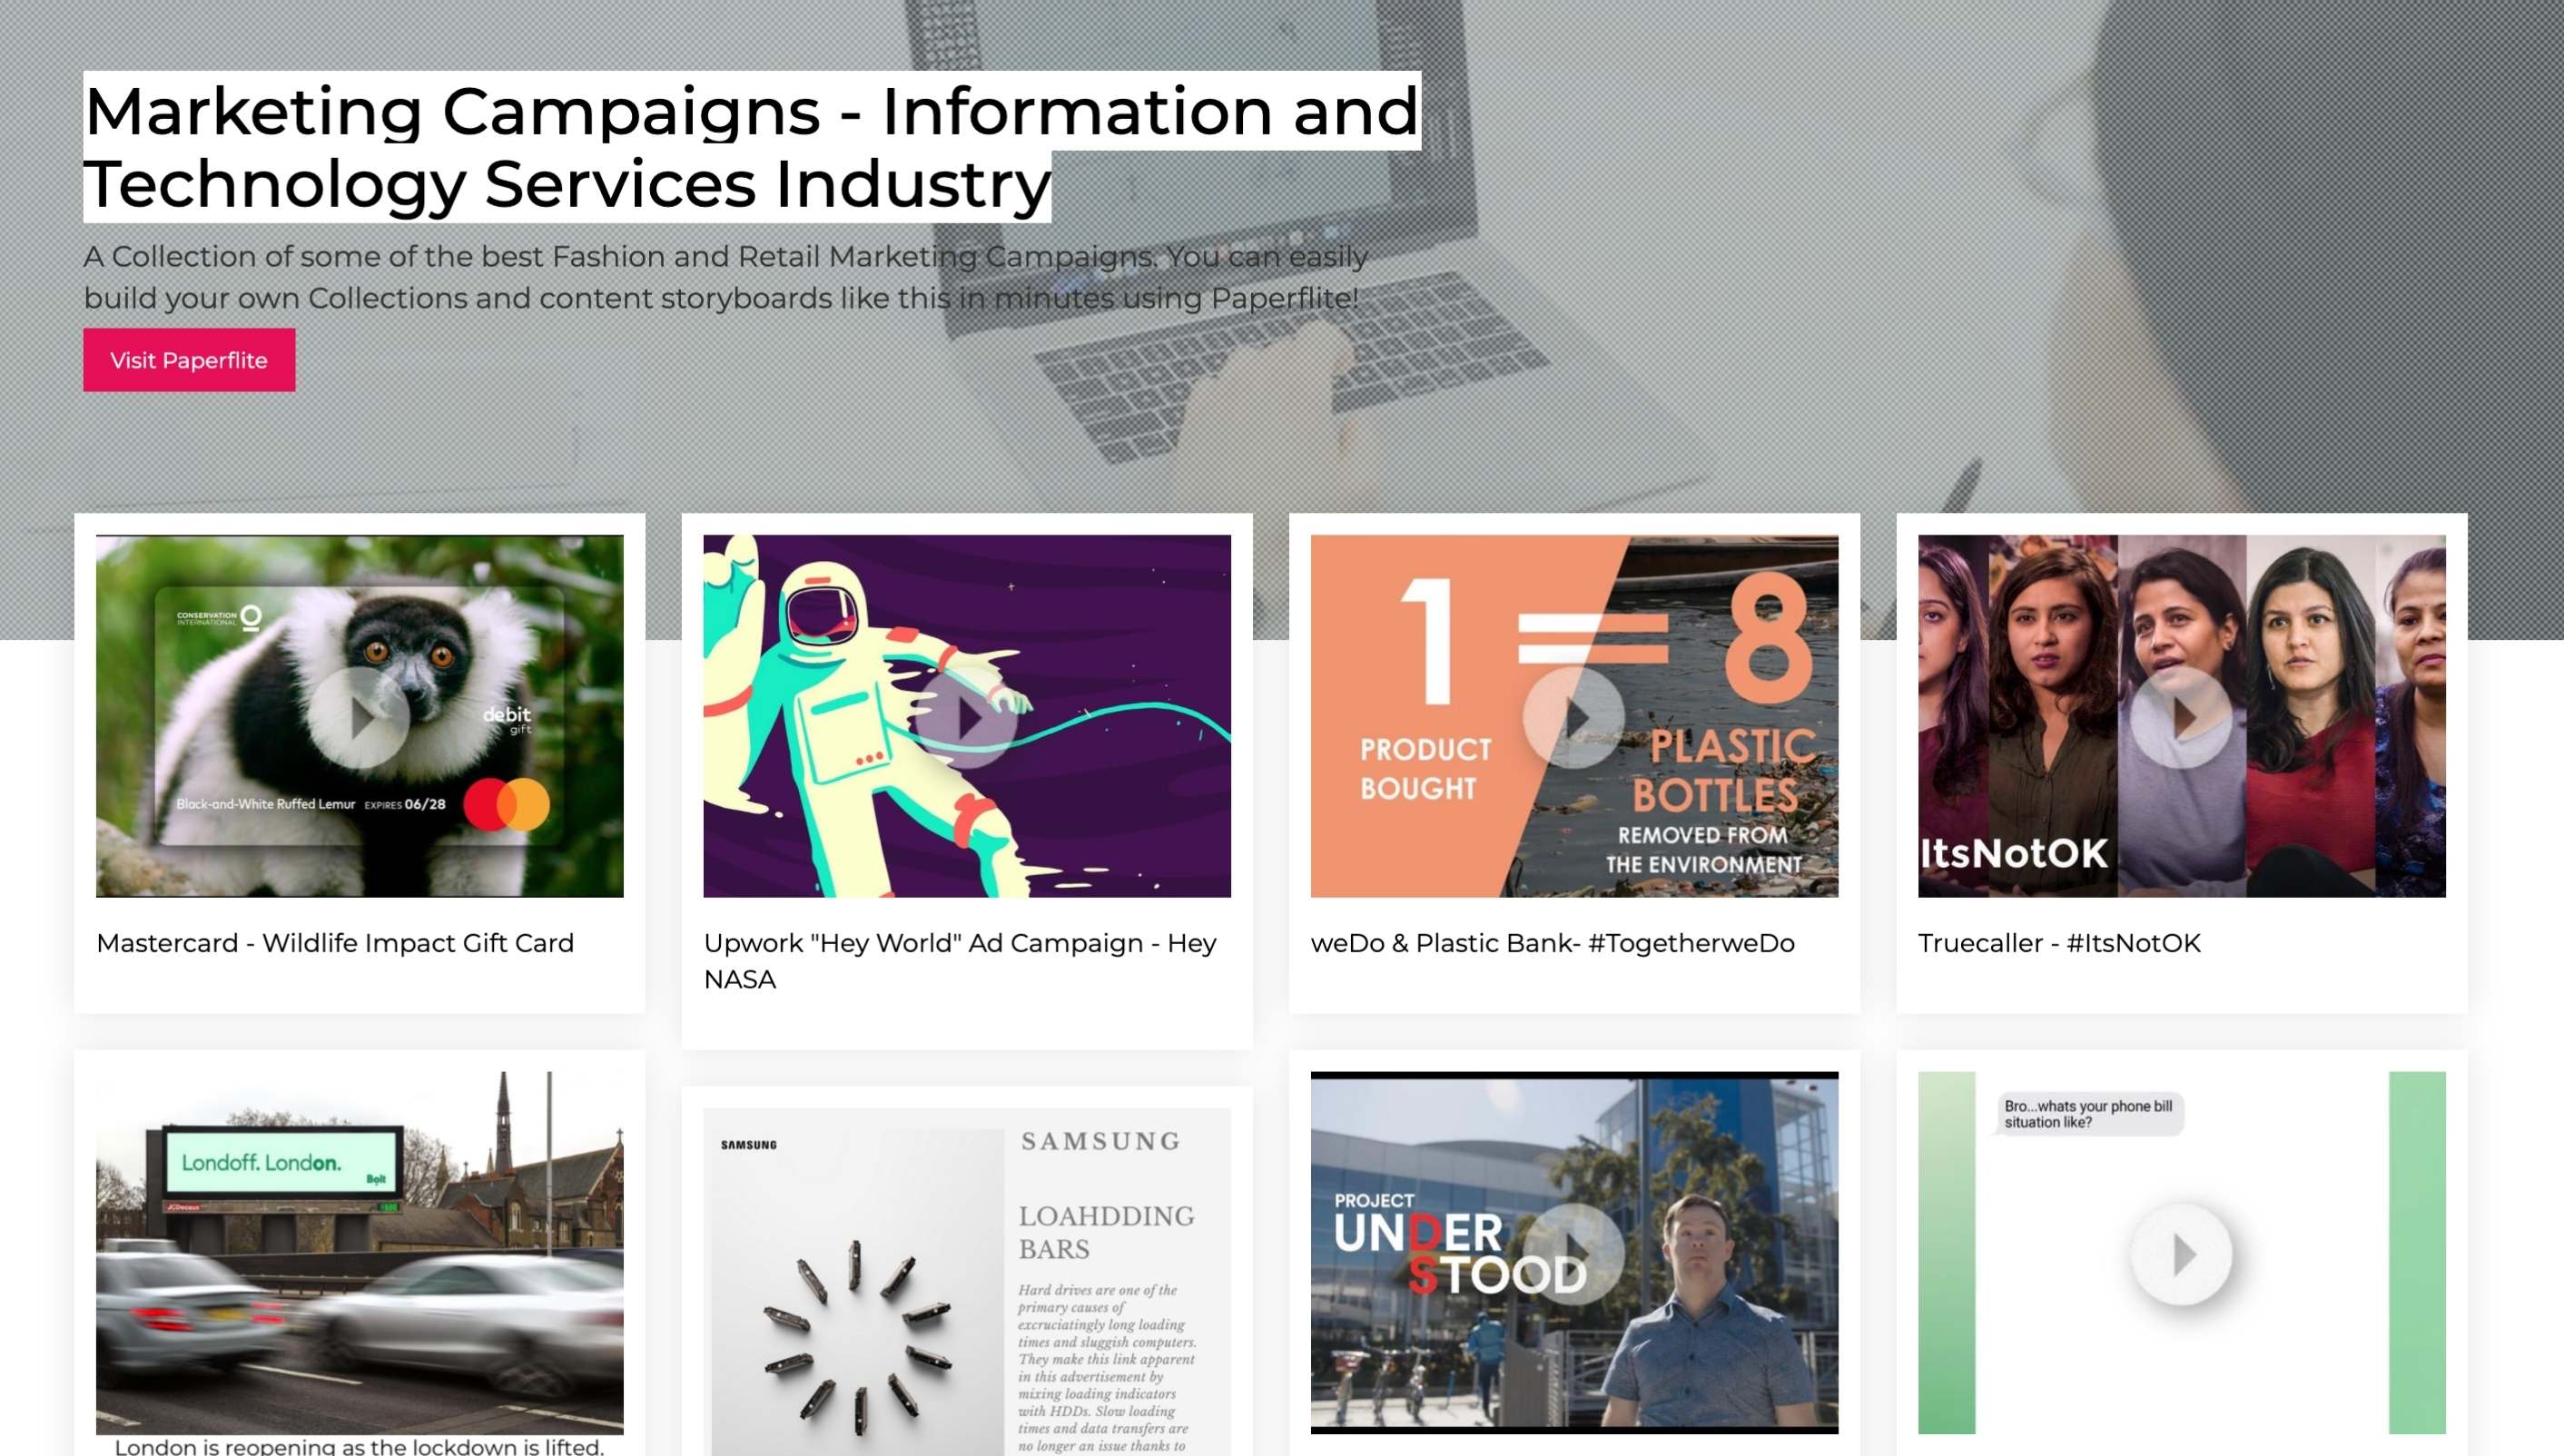 A Paperflite collection of Marketing Campaign examples in the IT industry